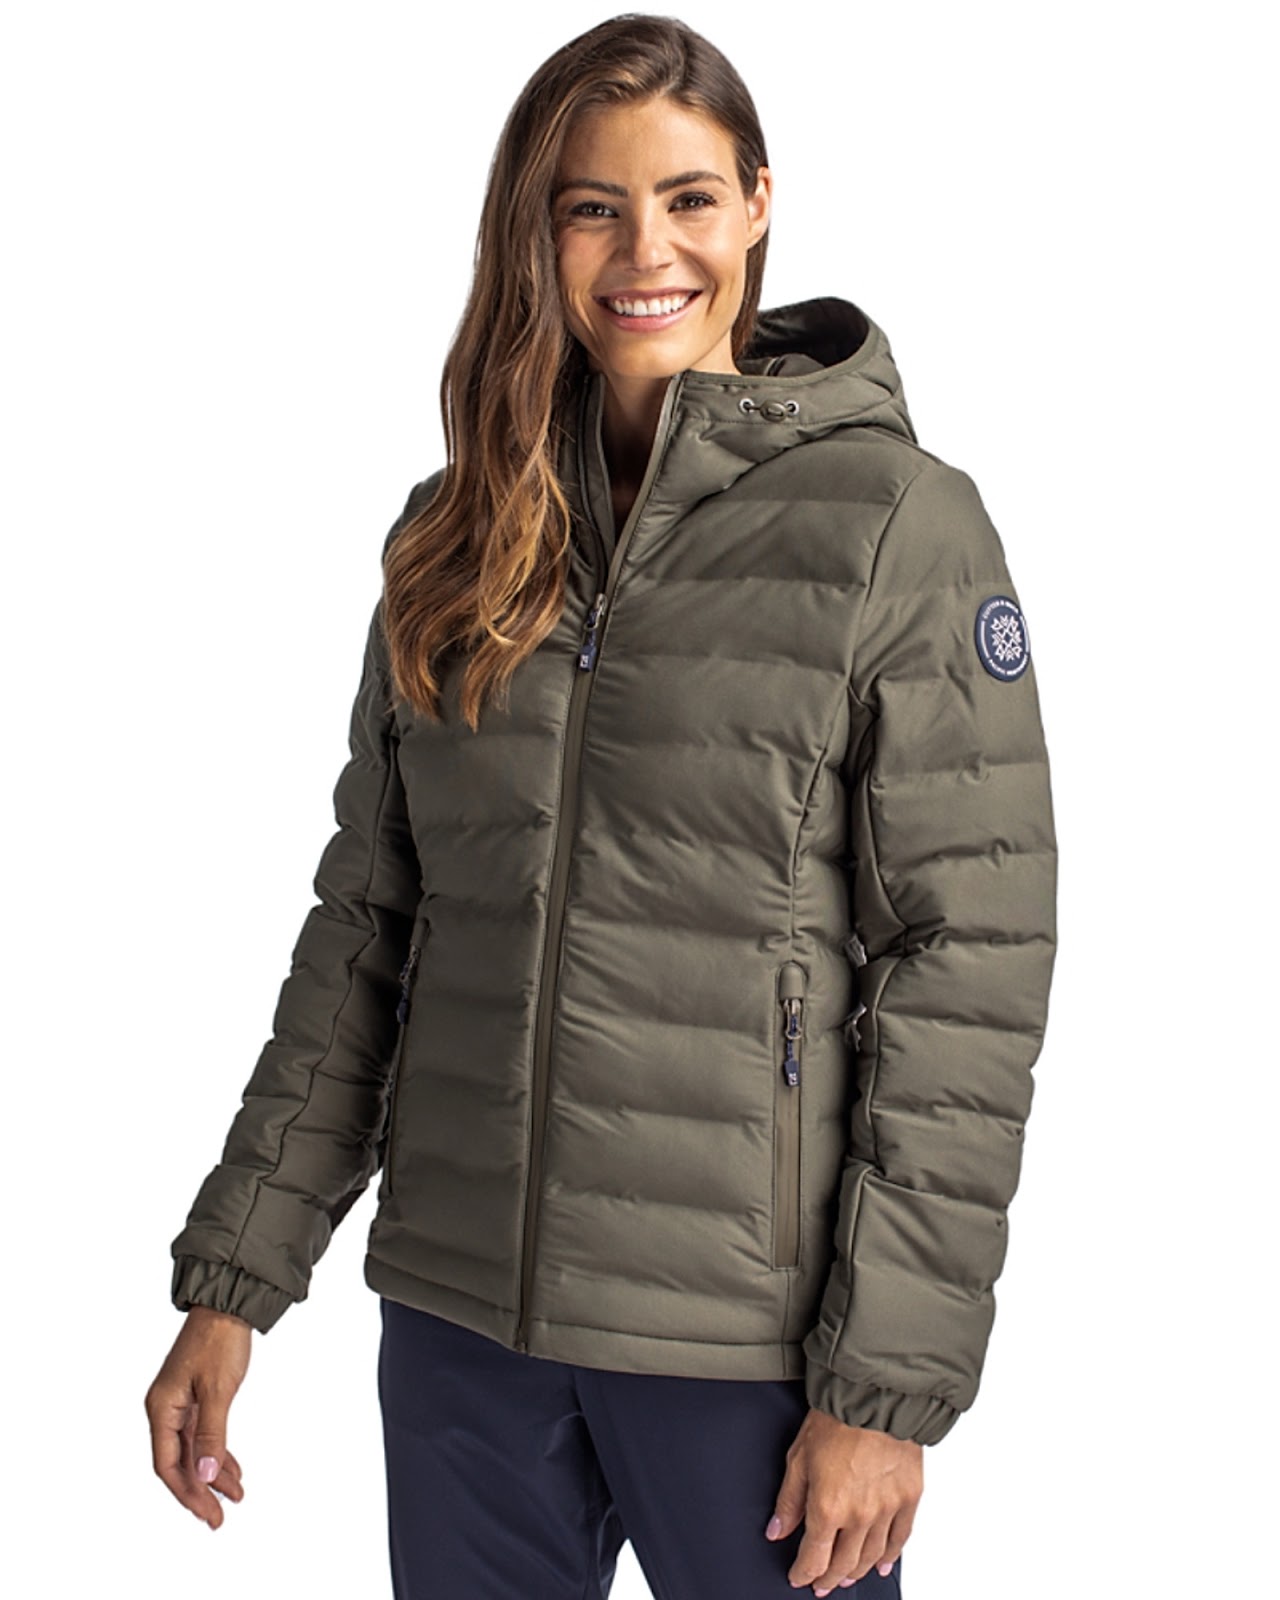 Cutter & Buck Mission Ridge Repreve® Eco Insulated Womens Puffer Jacket